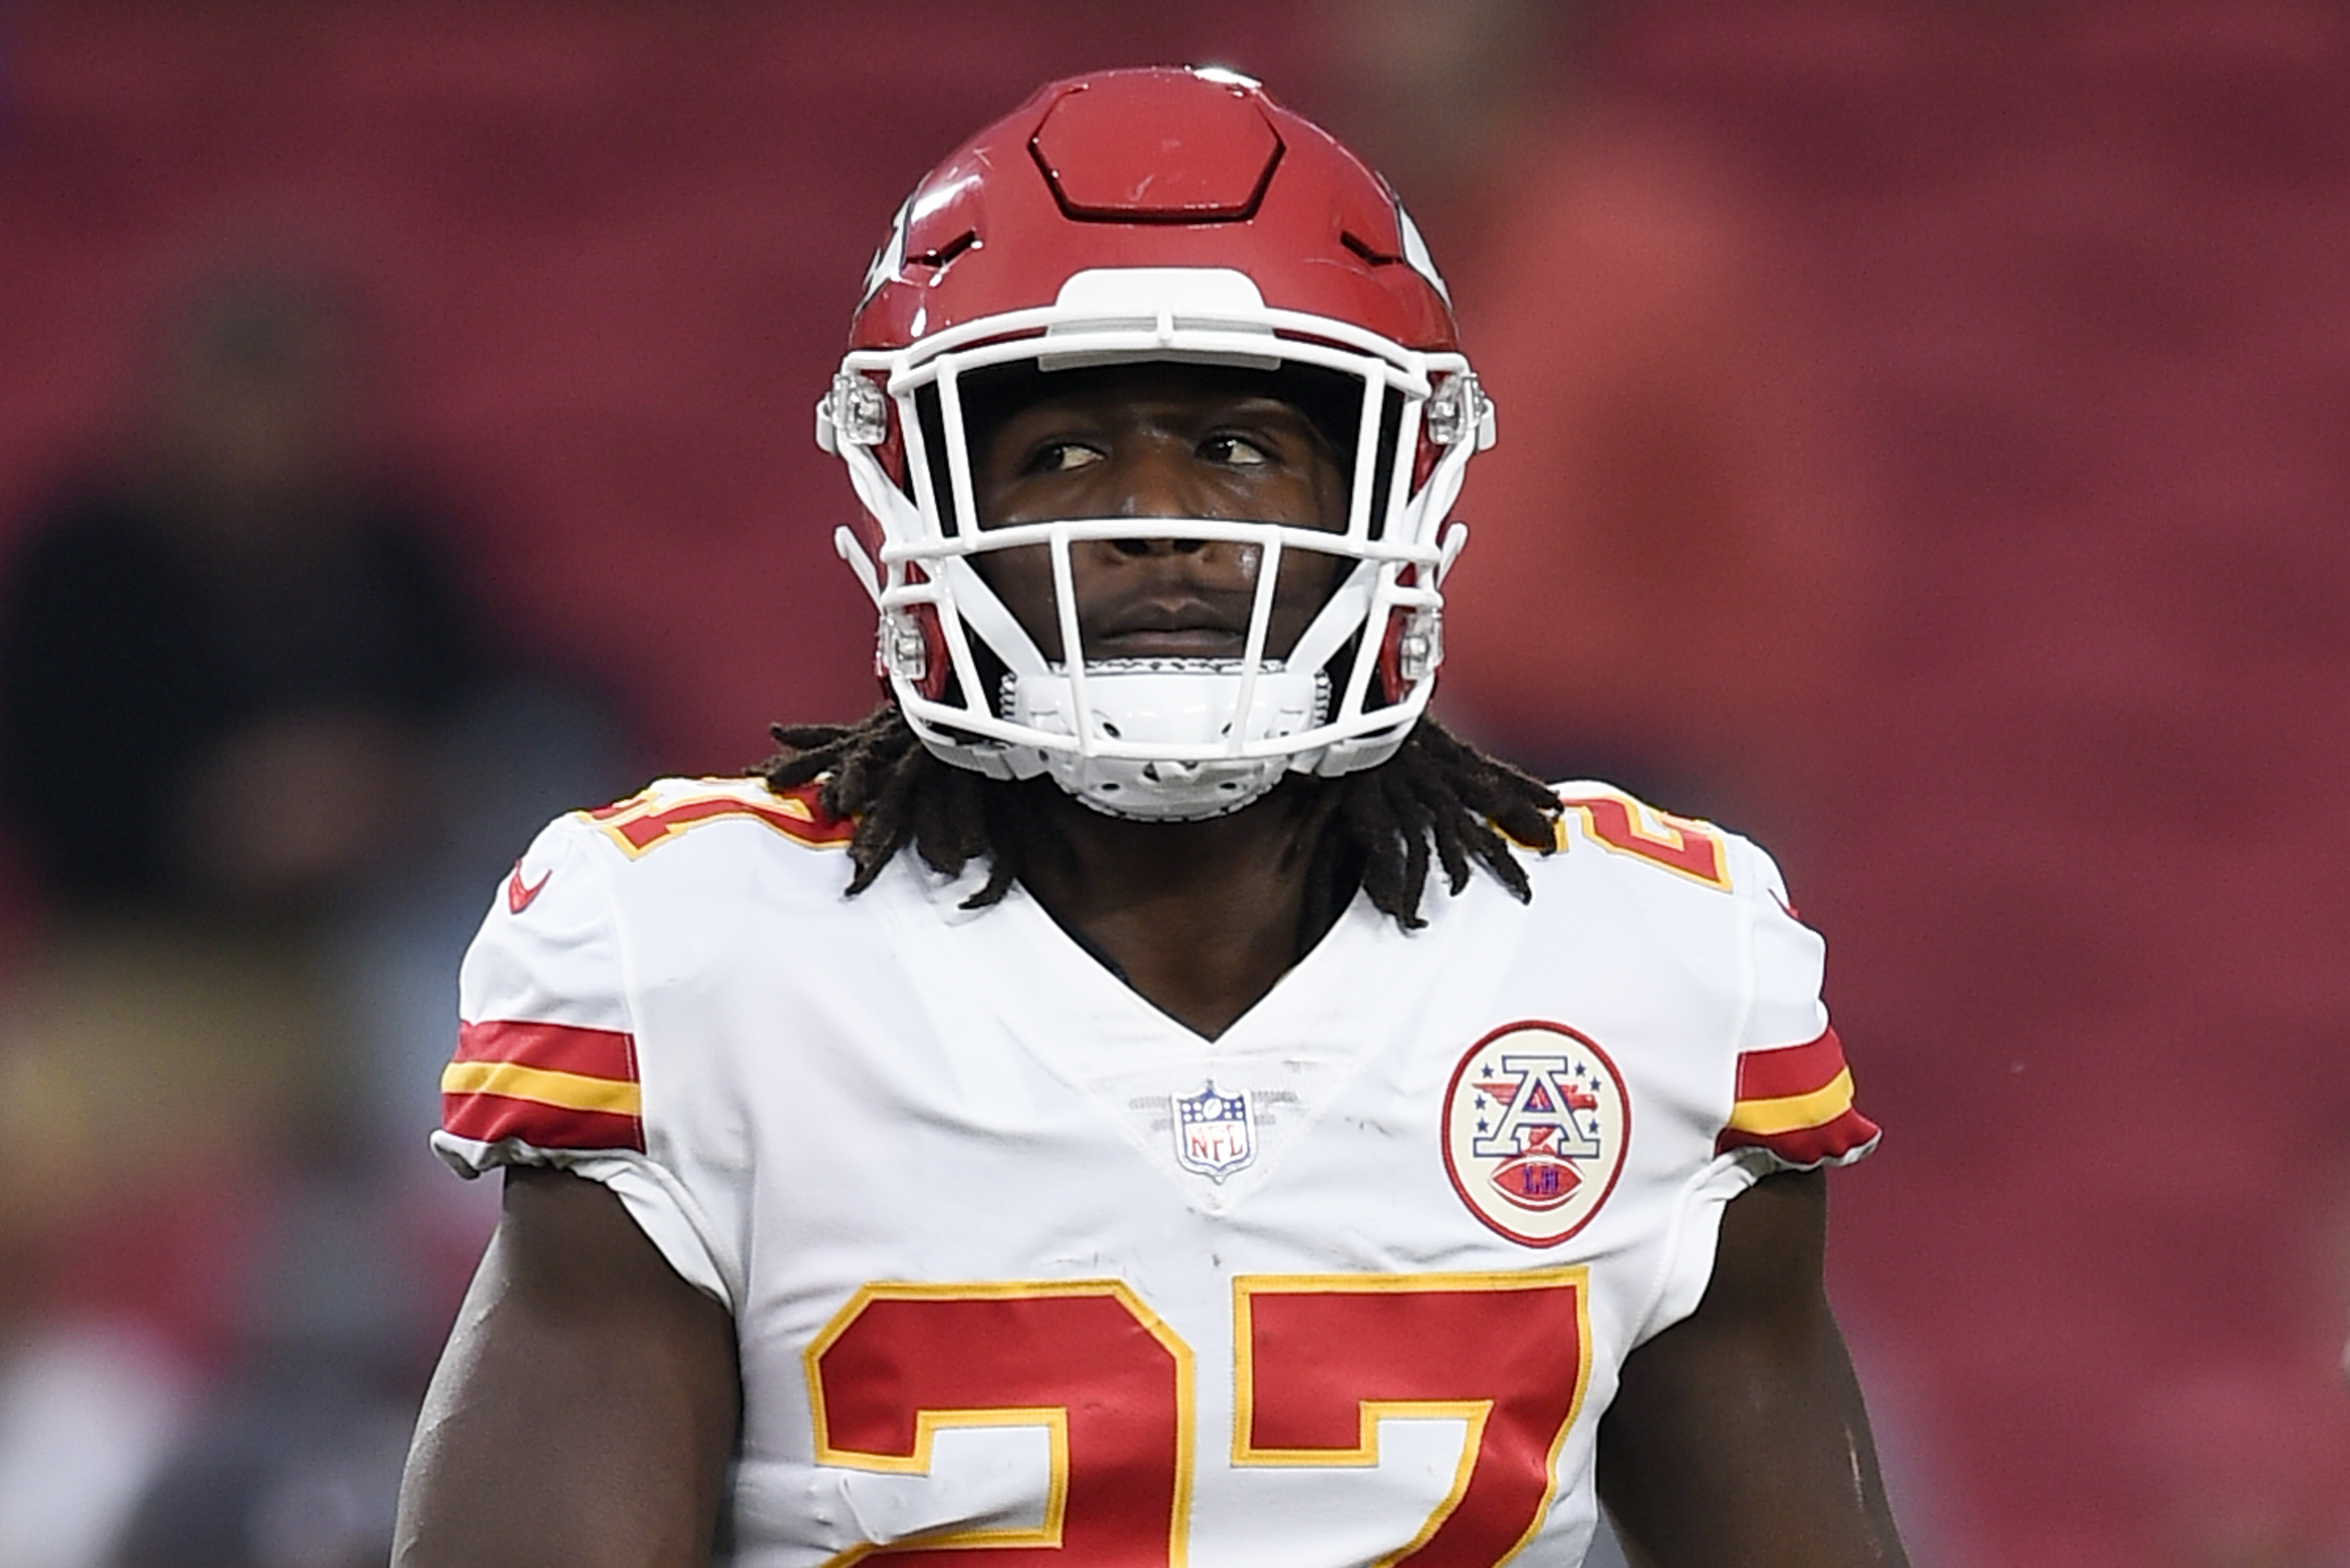 Kareem Hunt Apologizes for Shoving and Kicking Woman After Release